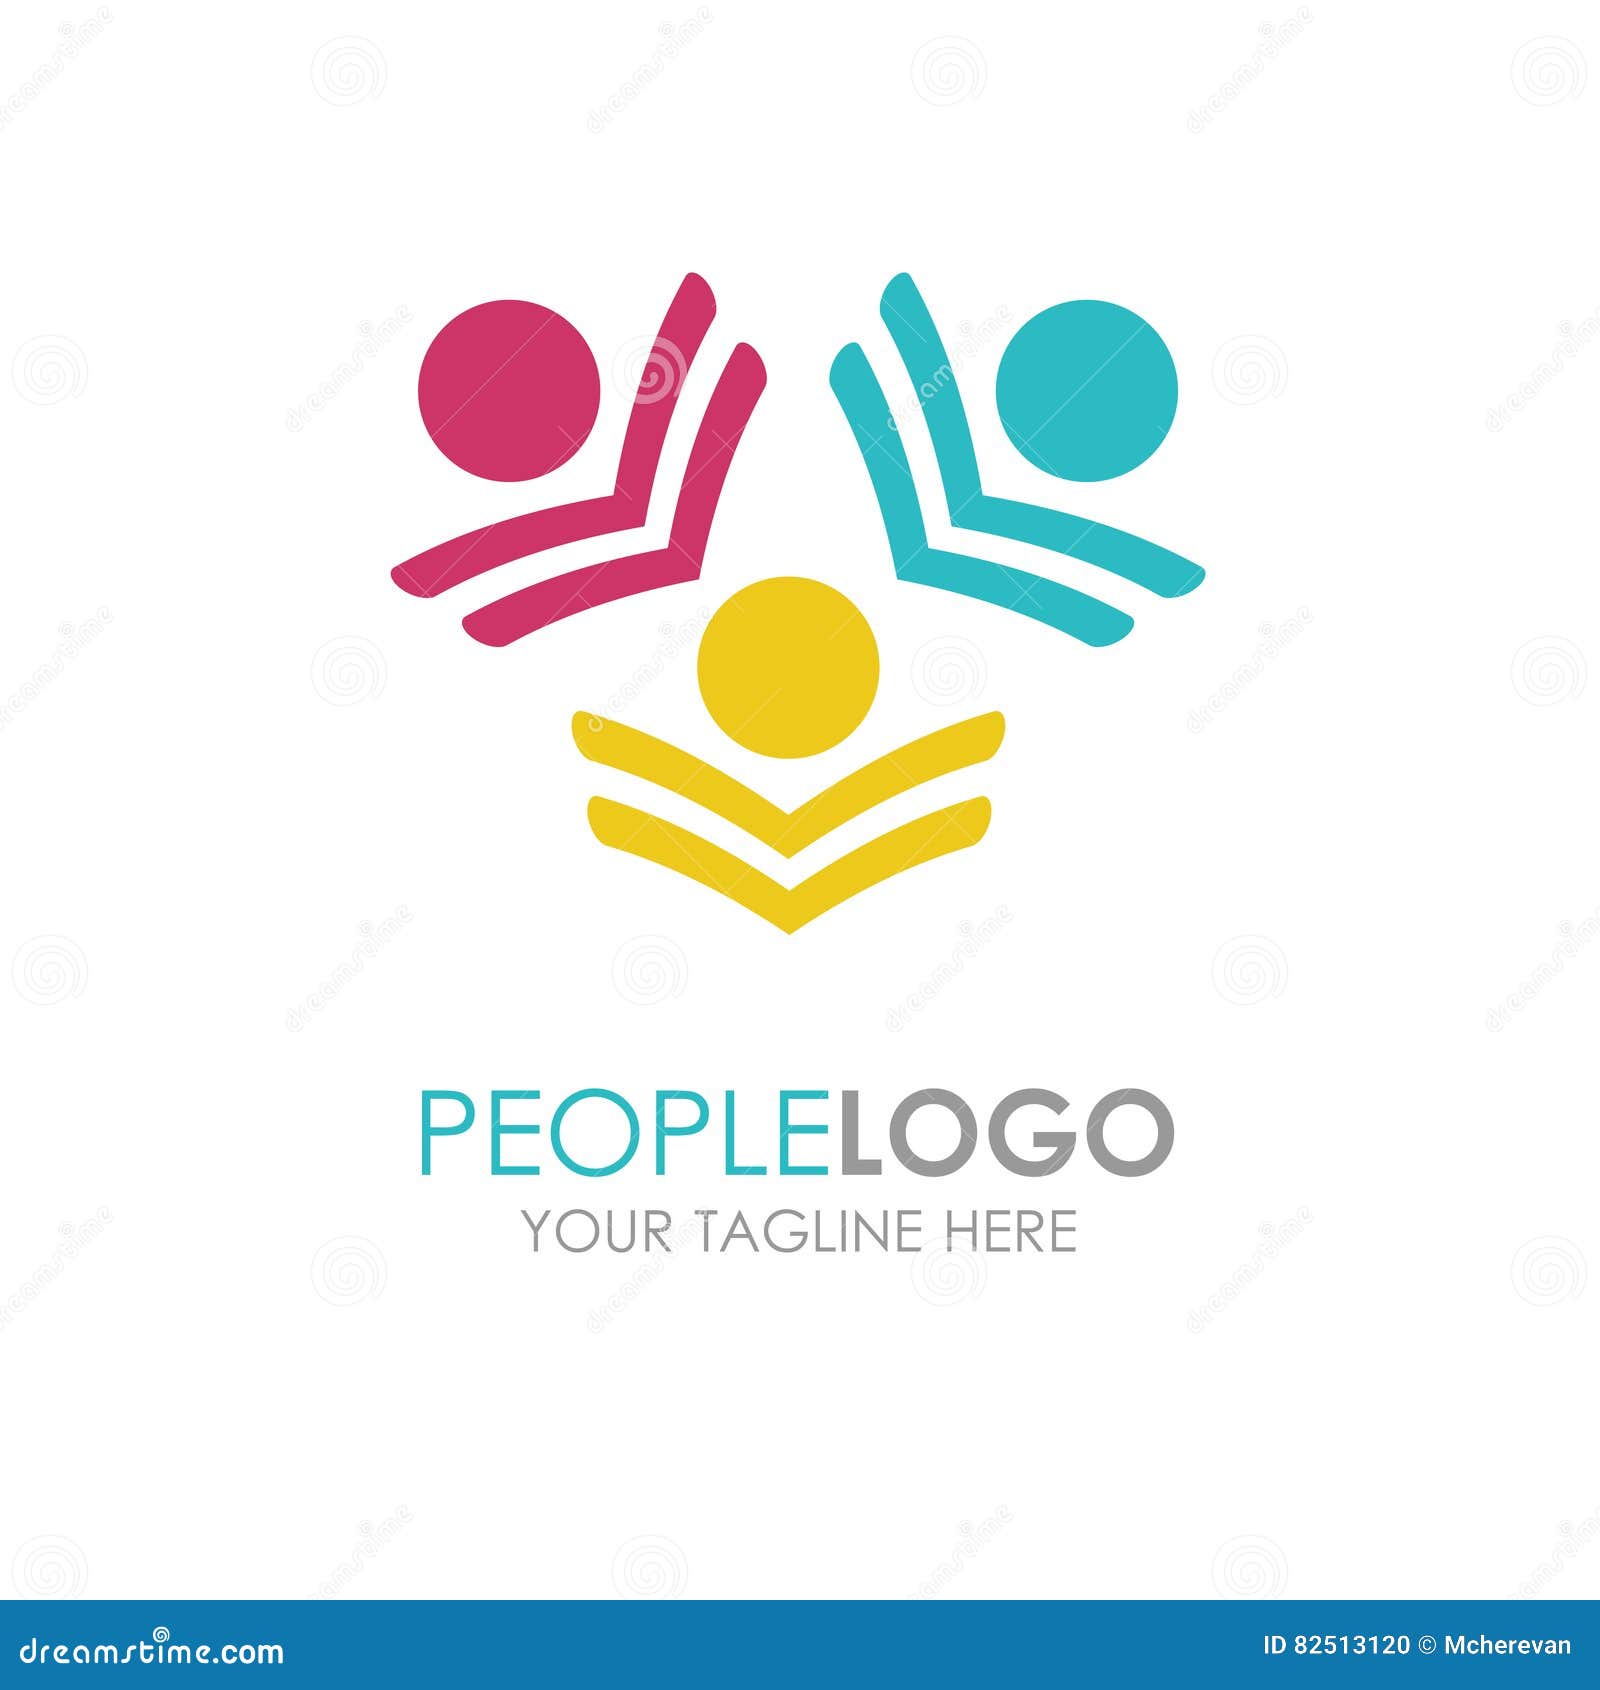 People Logo Design. Creative Abstract People Shapes Logo Stock ...